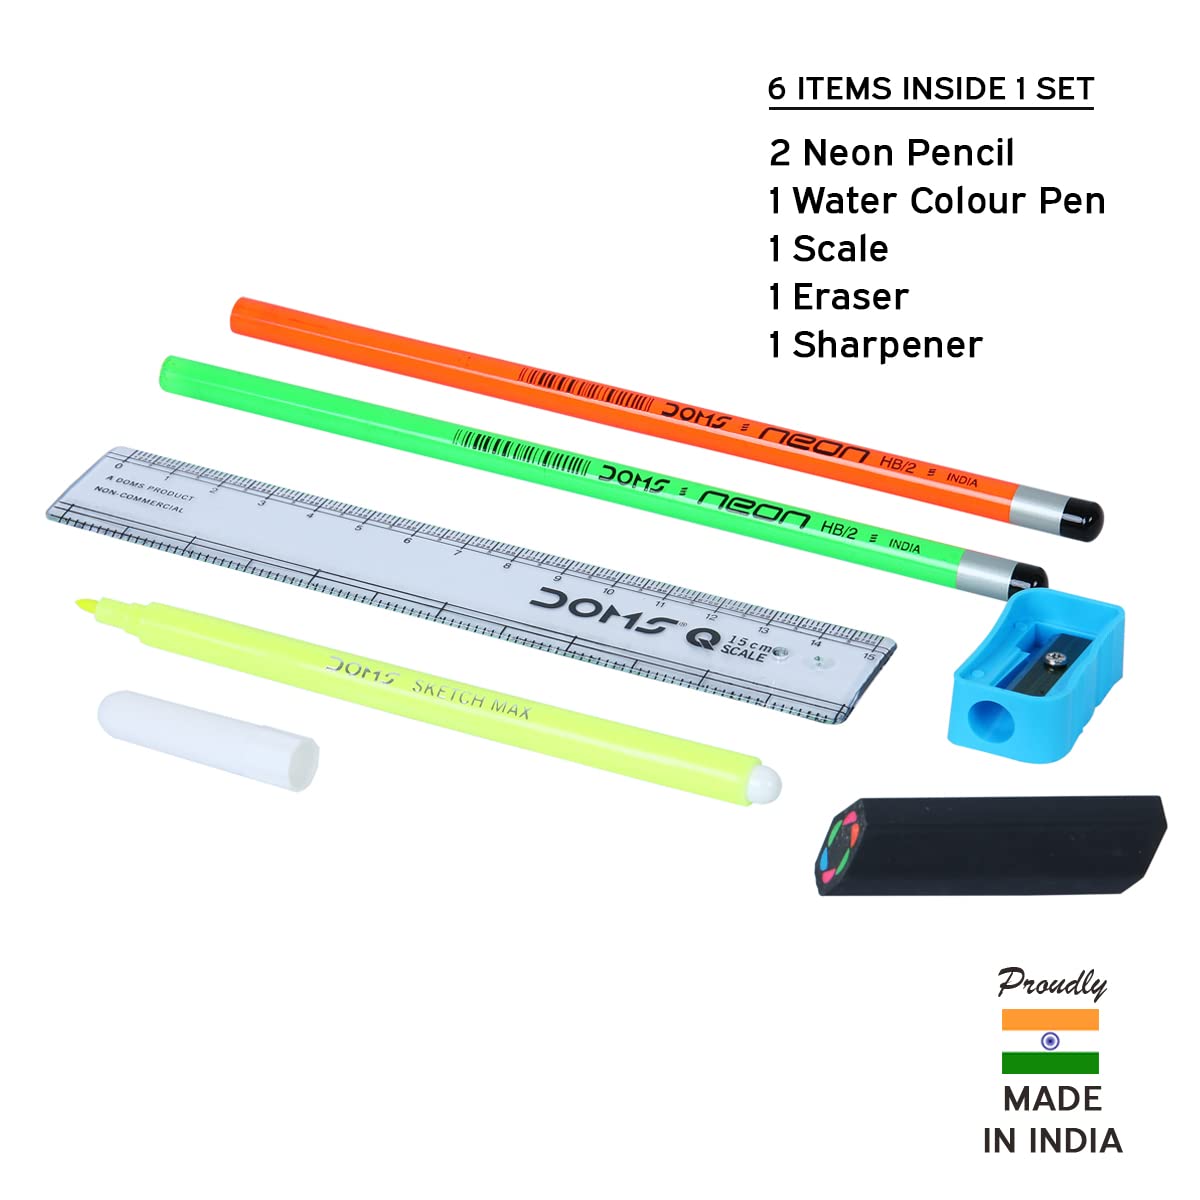 Doms Neon Prime Kit For Students And Gifting